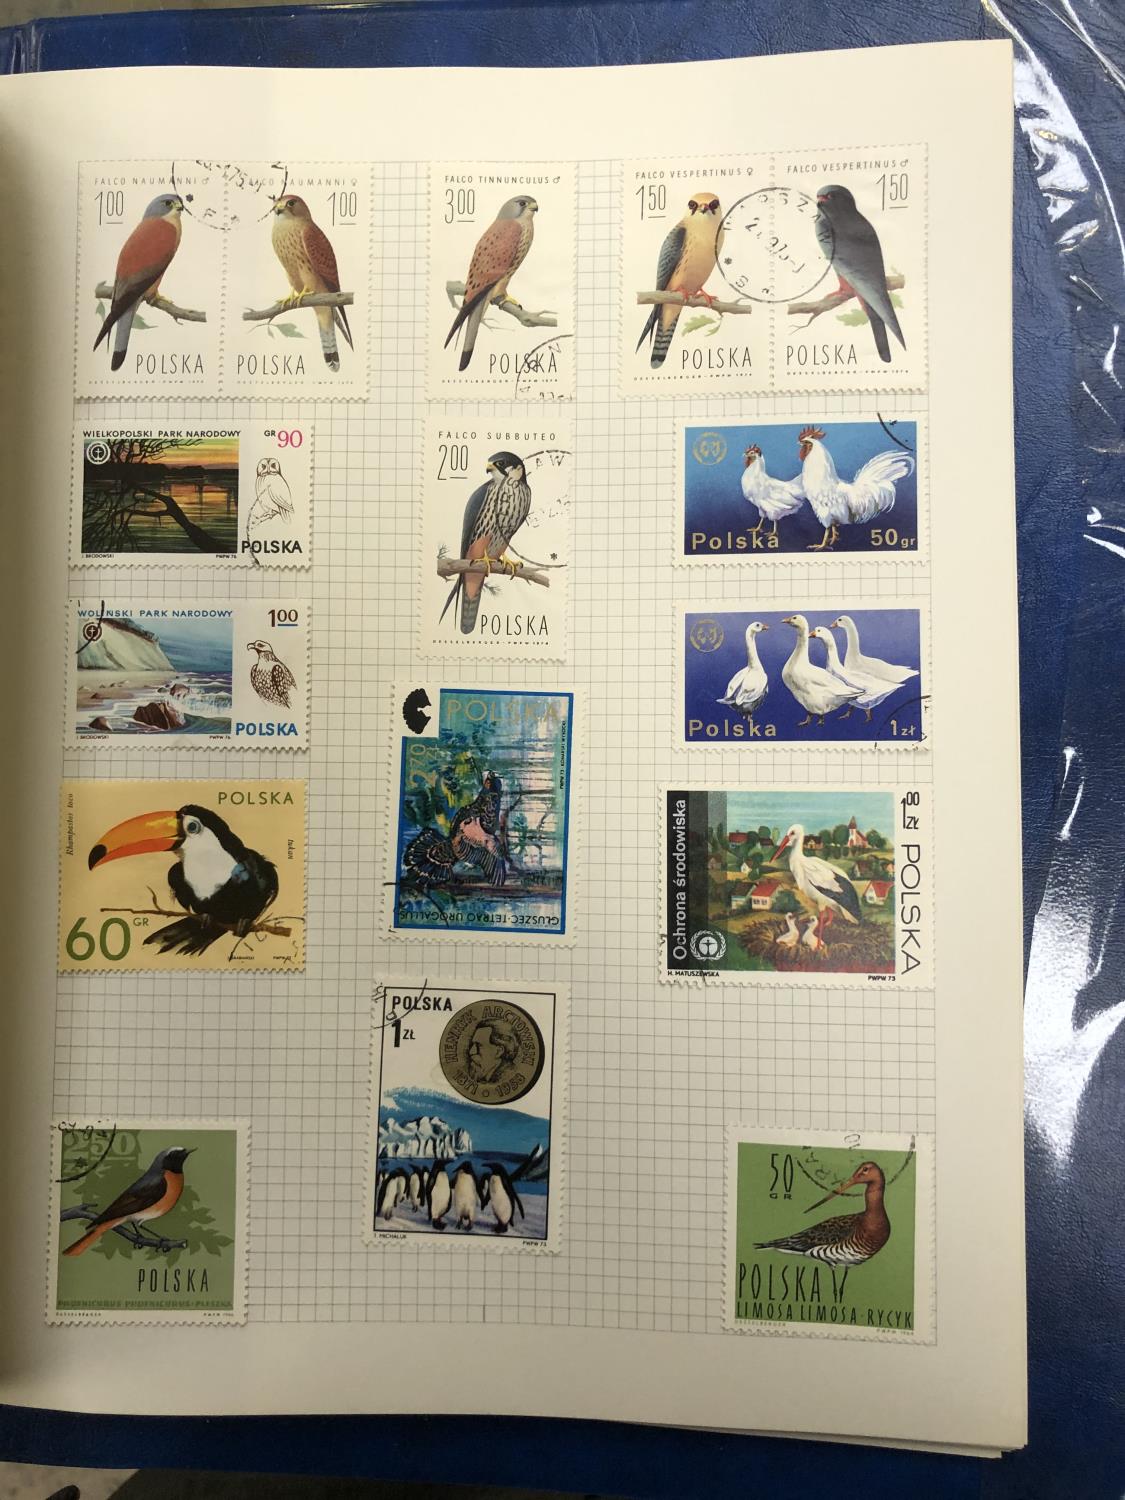 BIRDS . AN ALL WORLD THEMATIC COLLECTION OF BIRDS ON STAMPS . INCLUDED USA 2 X 25 SHEETS , PLUS - Image 9 of 9